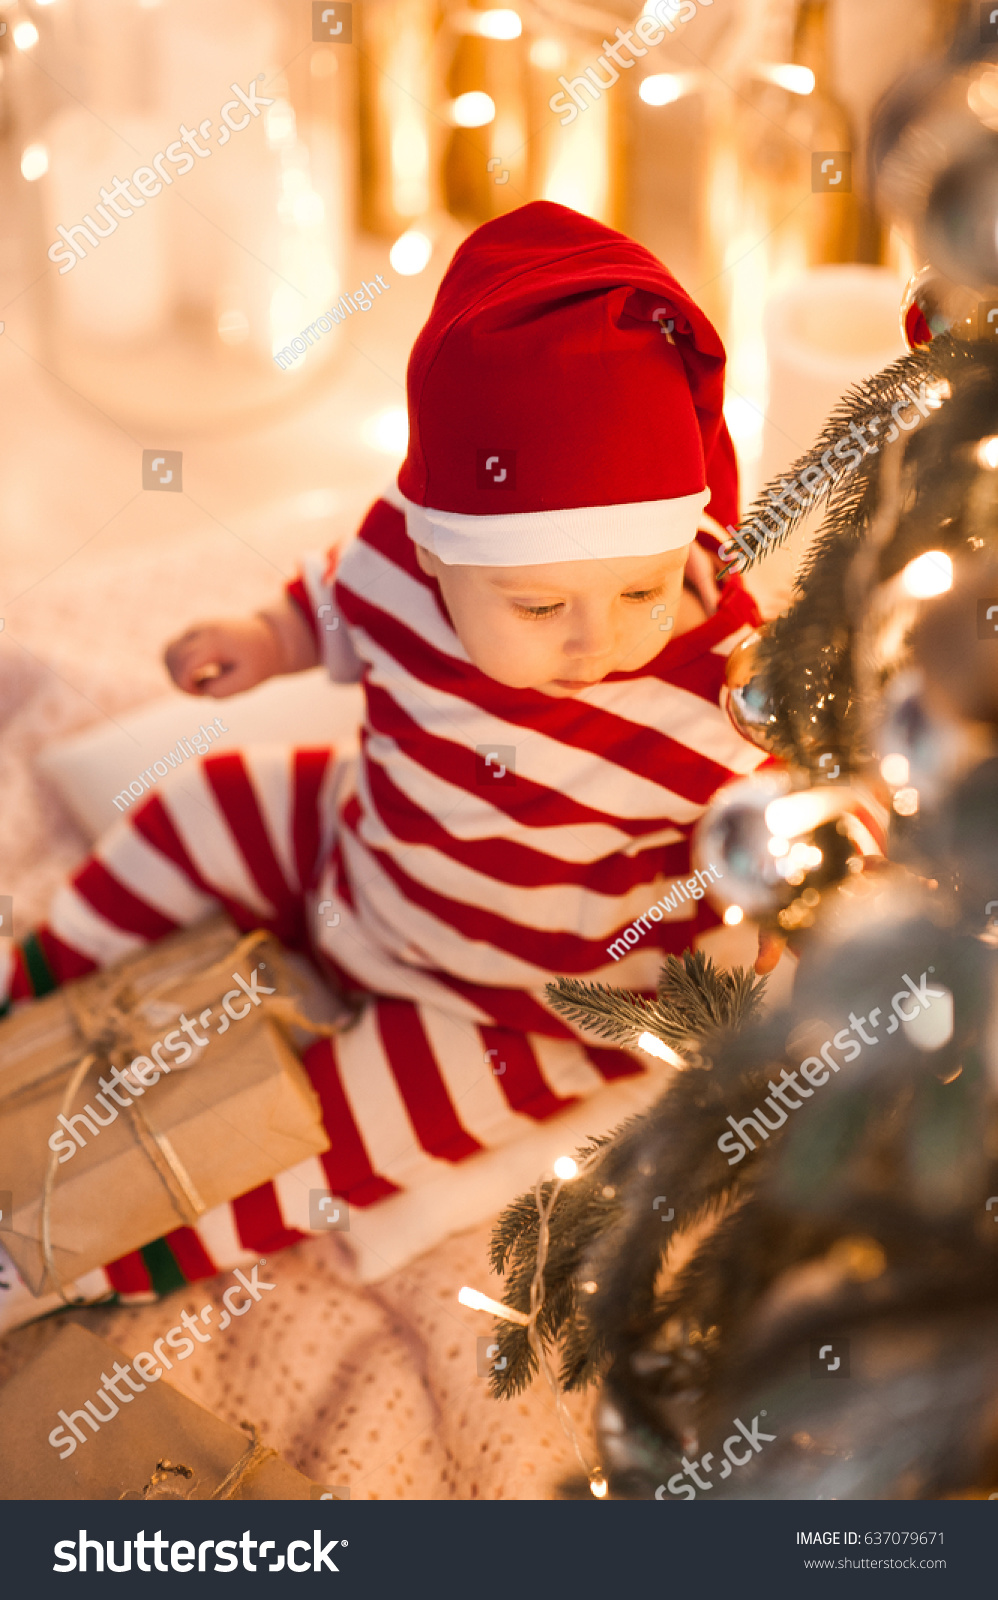 9 month old baby gifts for christmas